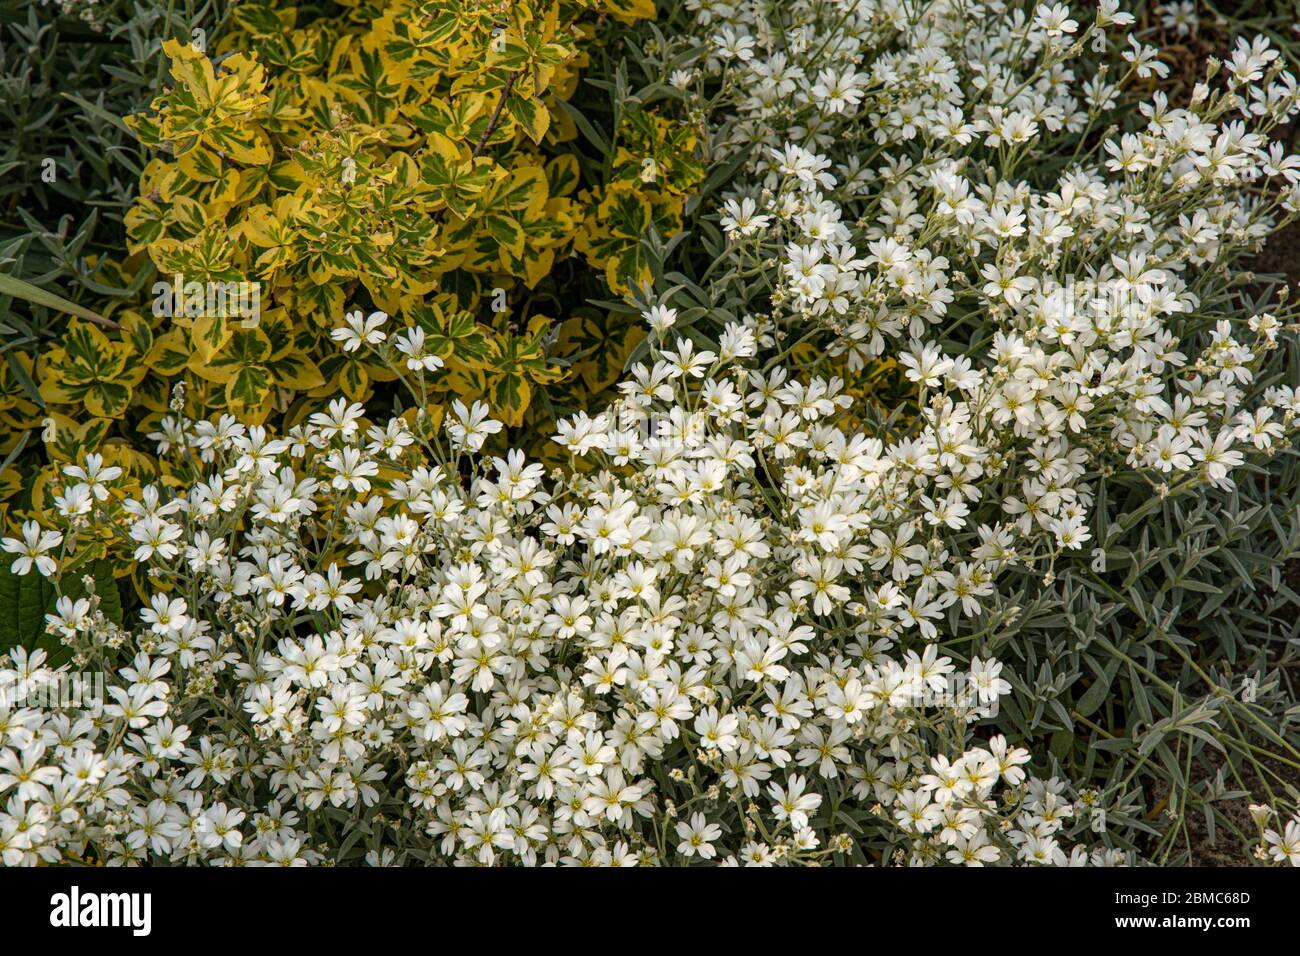 Floral backdrop of many small white flowers among green yellow variegated leaves on flowerbed of Alpine slide in garden. Herbal texture of garden plan Stock Photo